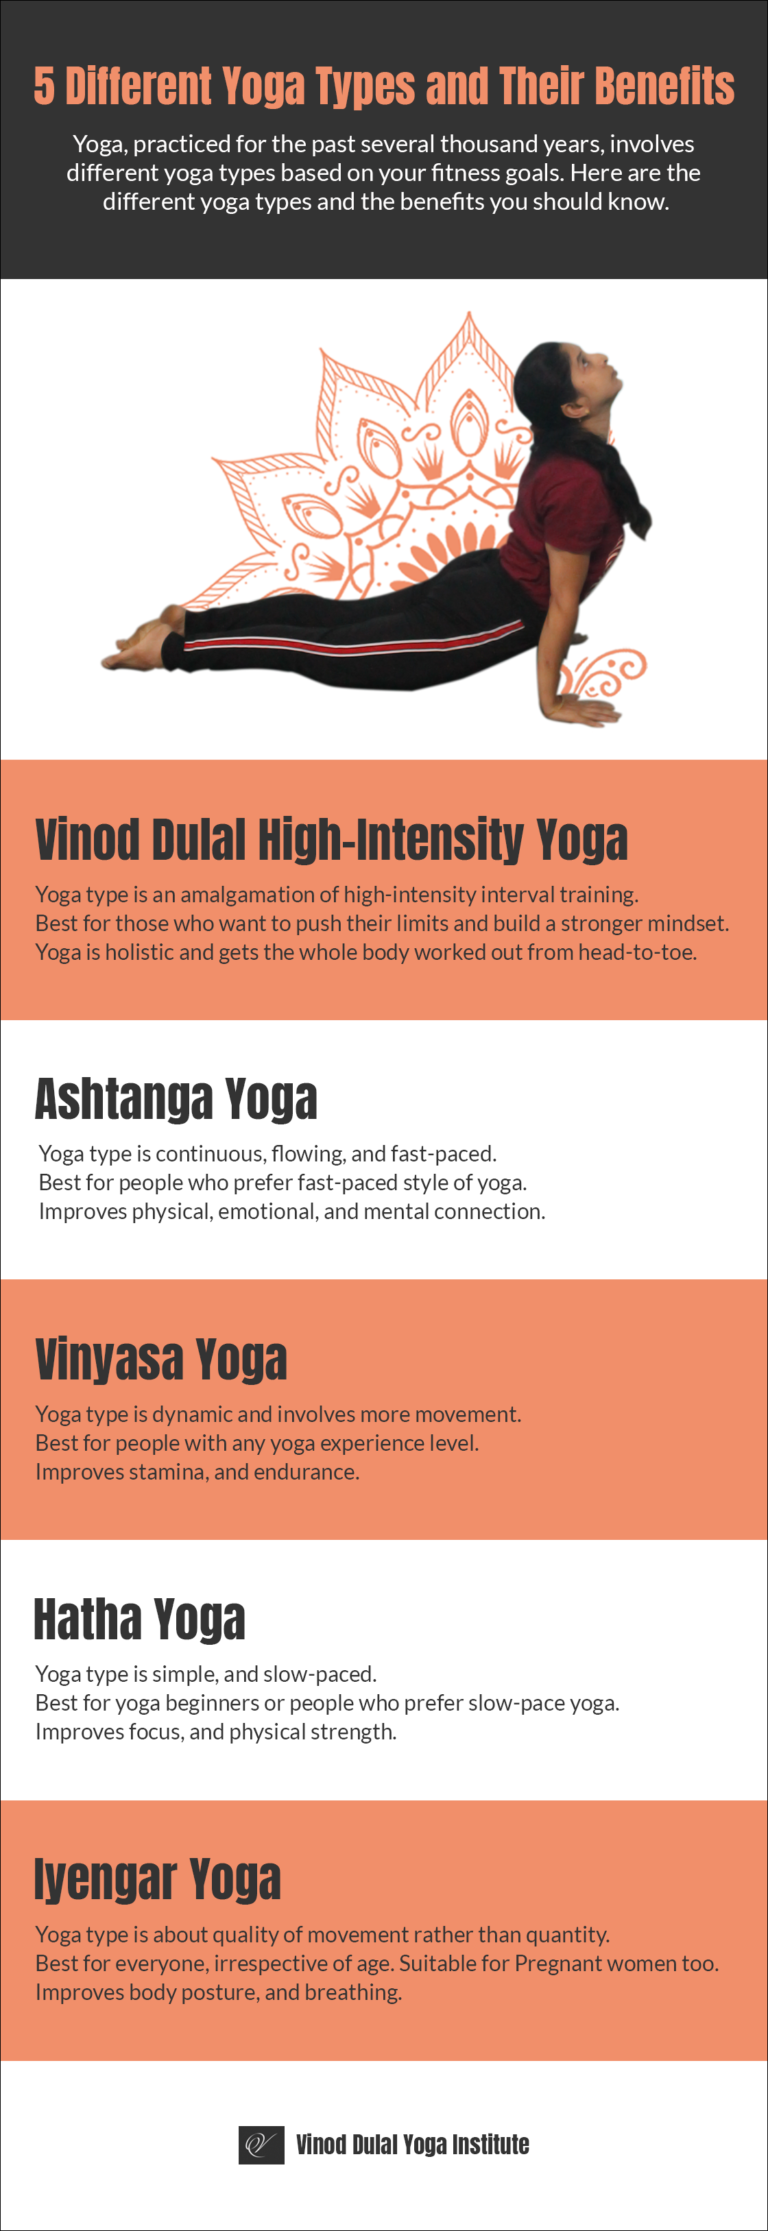 5 Different Types of Yoga and Their Benefits